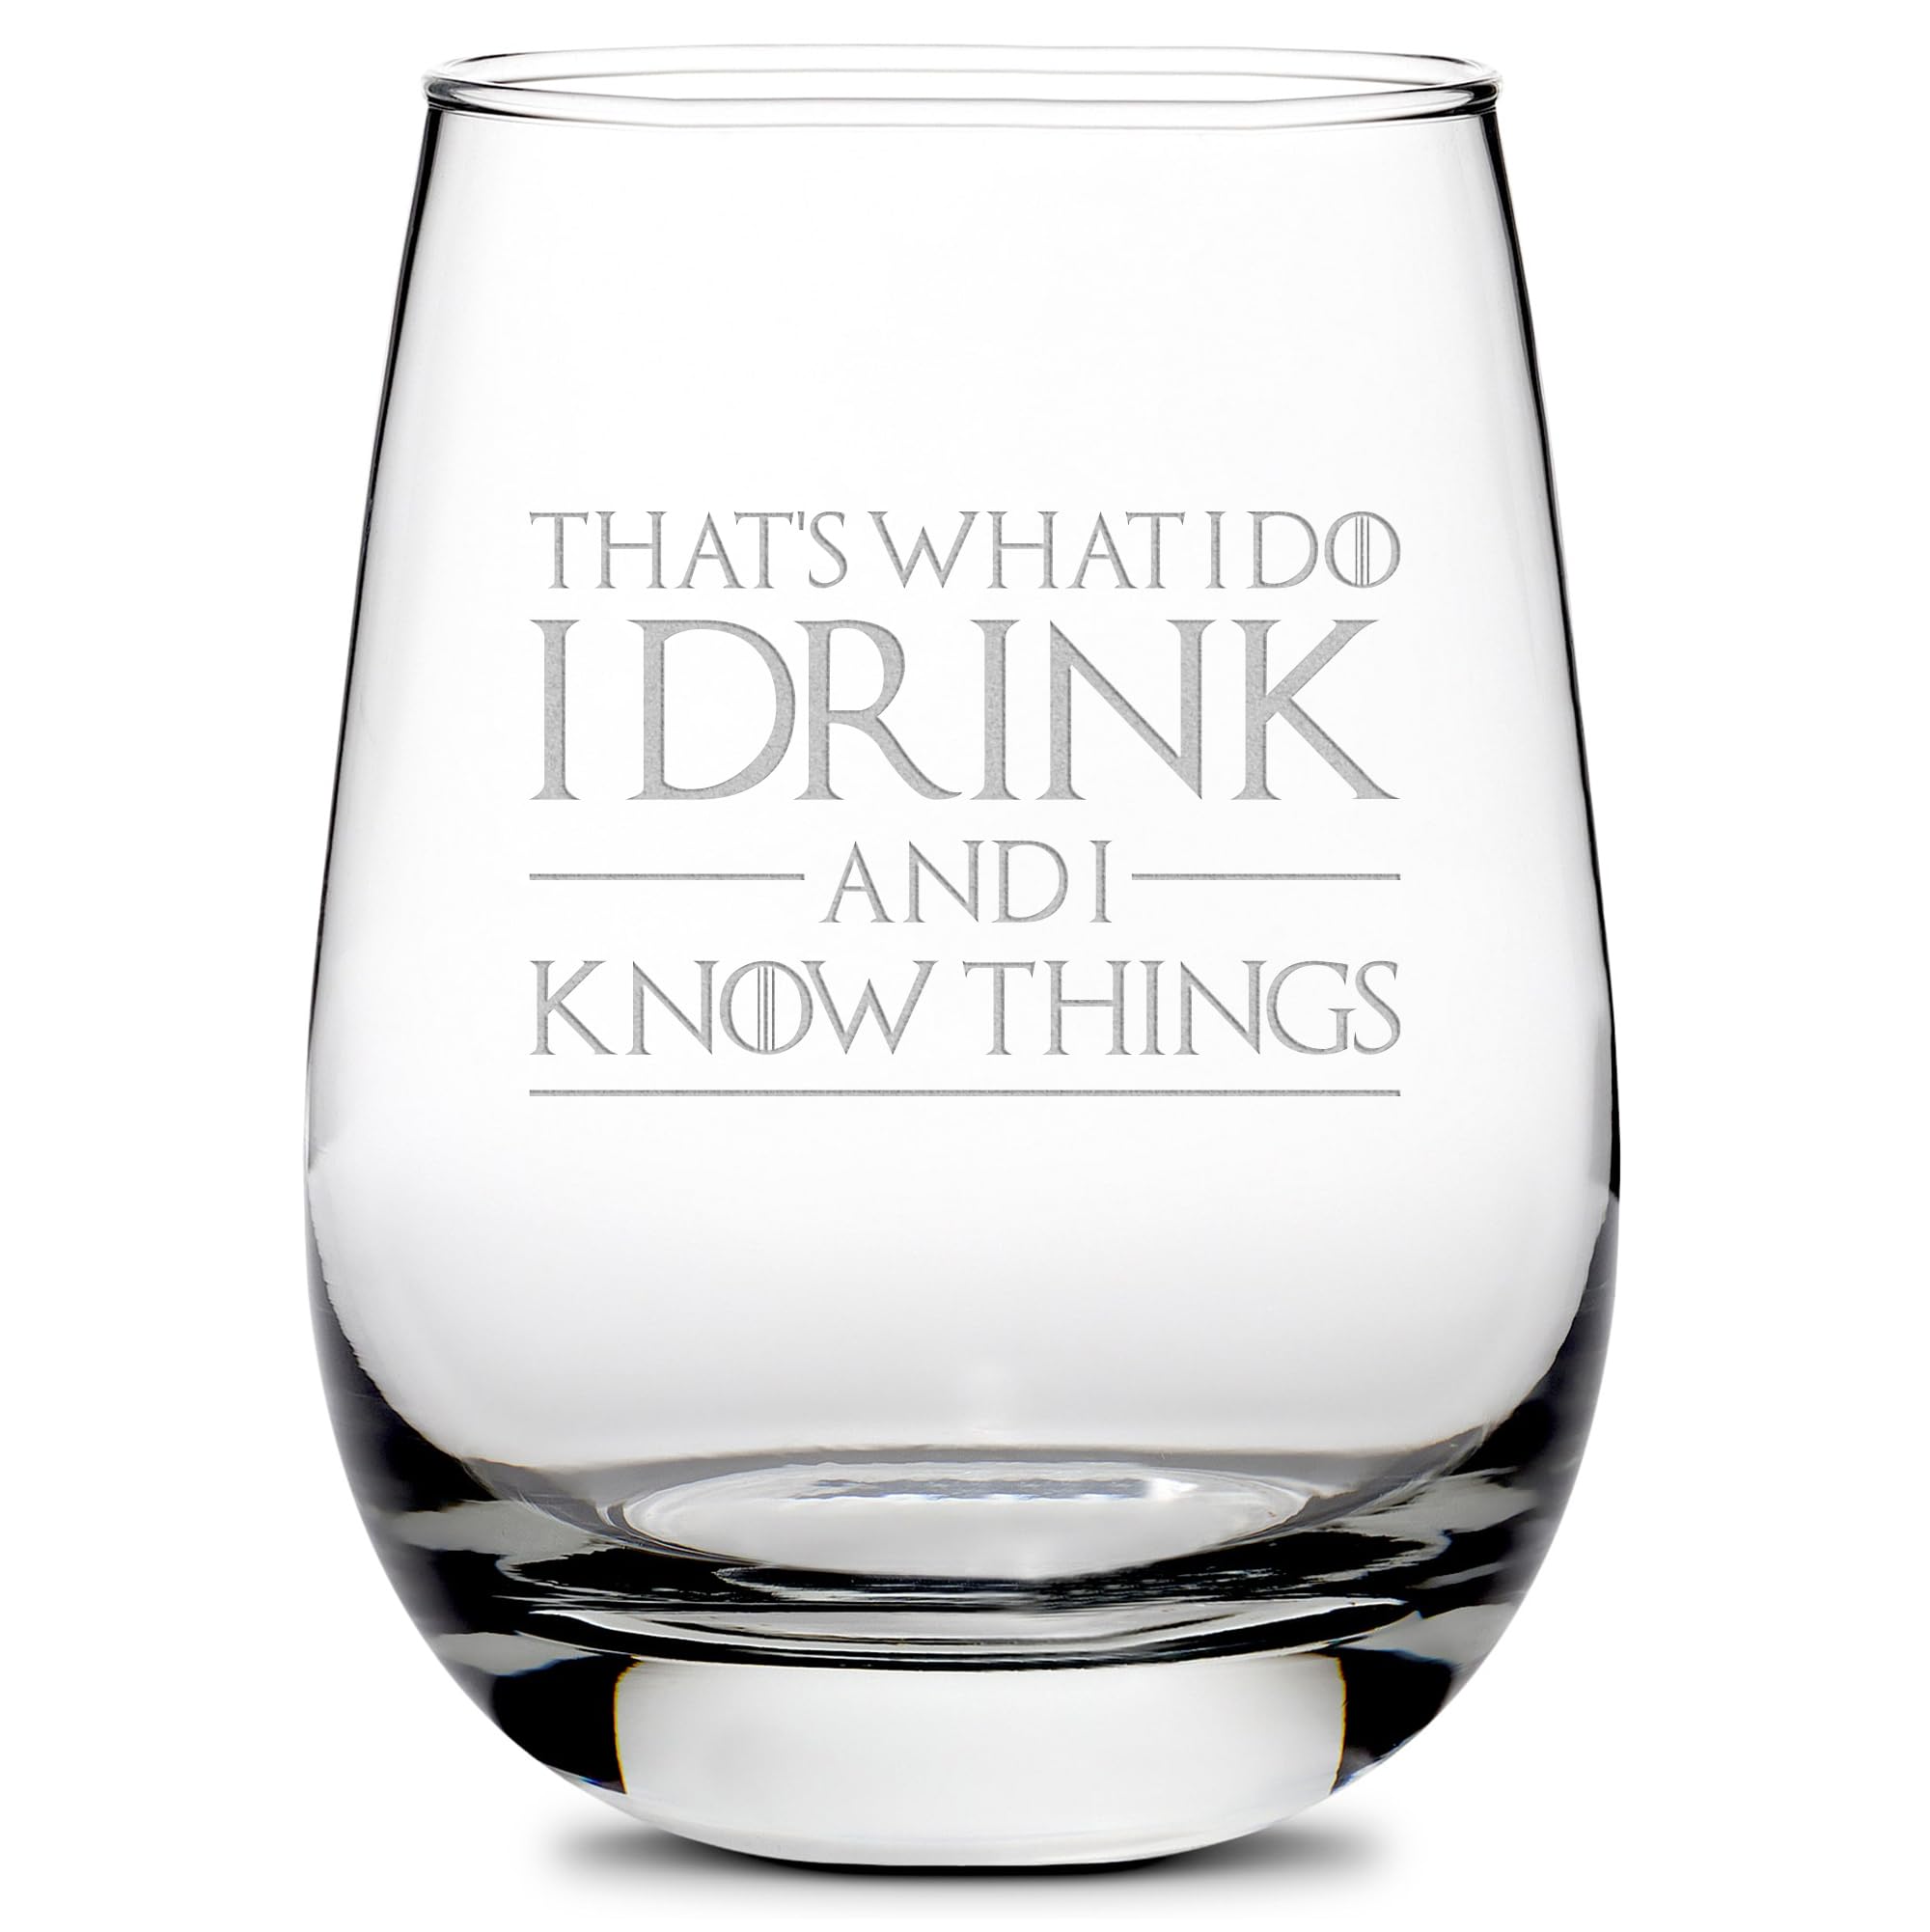 Integrity Bottles Premium Stemless Wine Glass, That's What I Do, Game of Thrones Quote, Sand Carved by Hand, 16oz